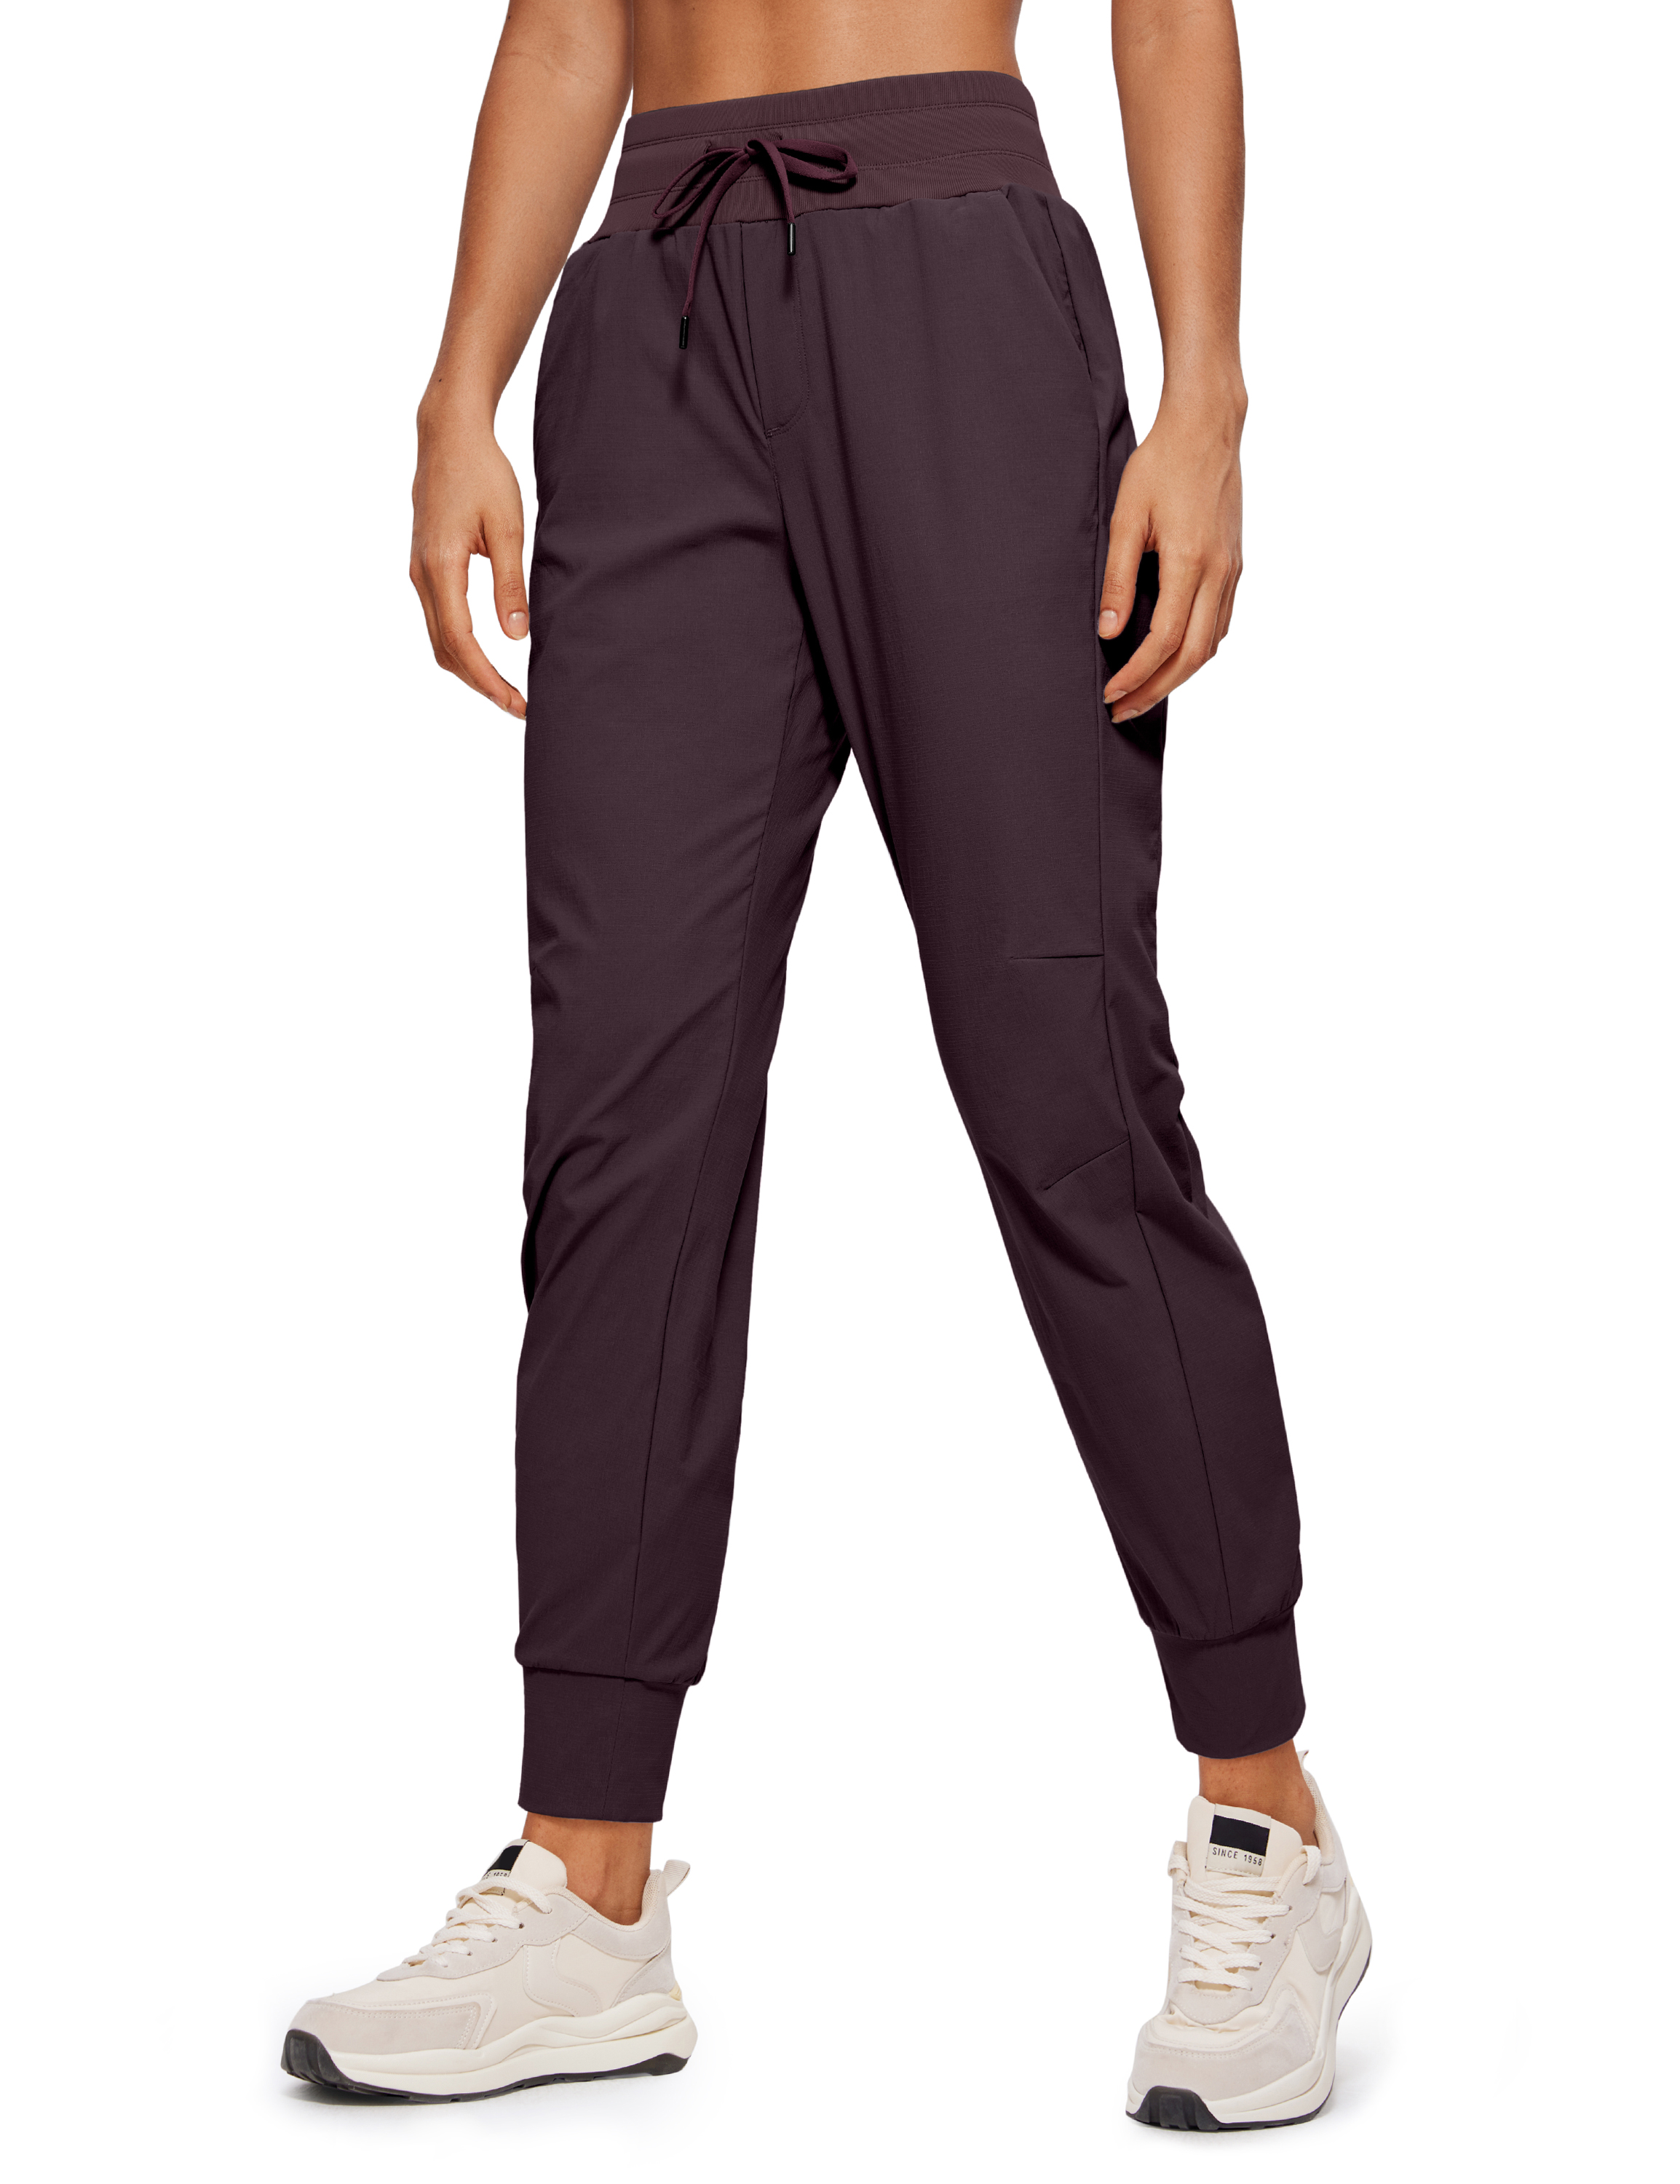 CRZ YOGA Ripstop Jogger for Women 27.5 Inches Trave Hiking Pants with  Pockets